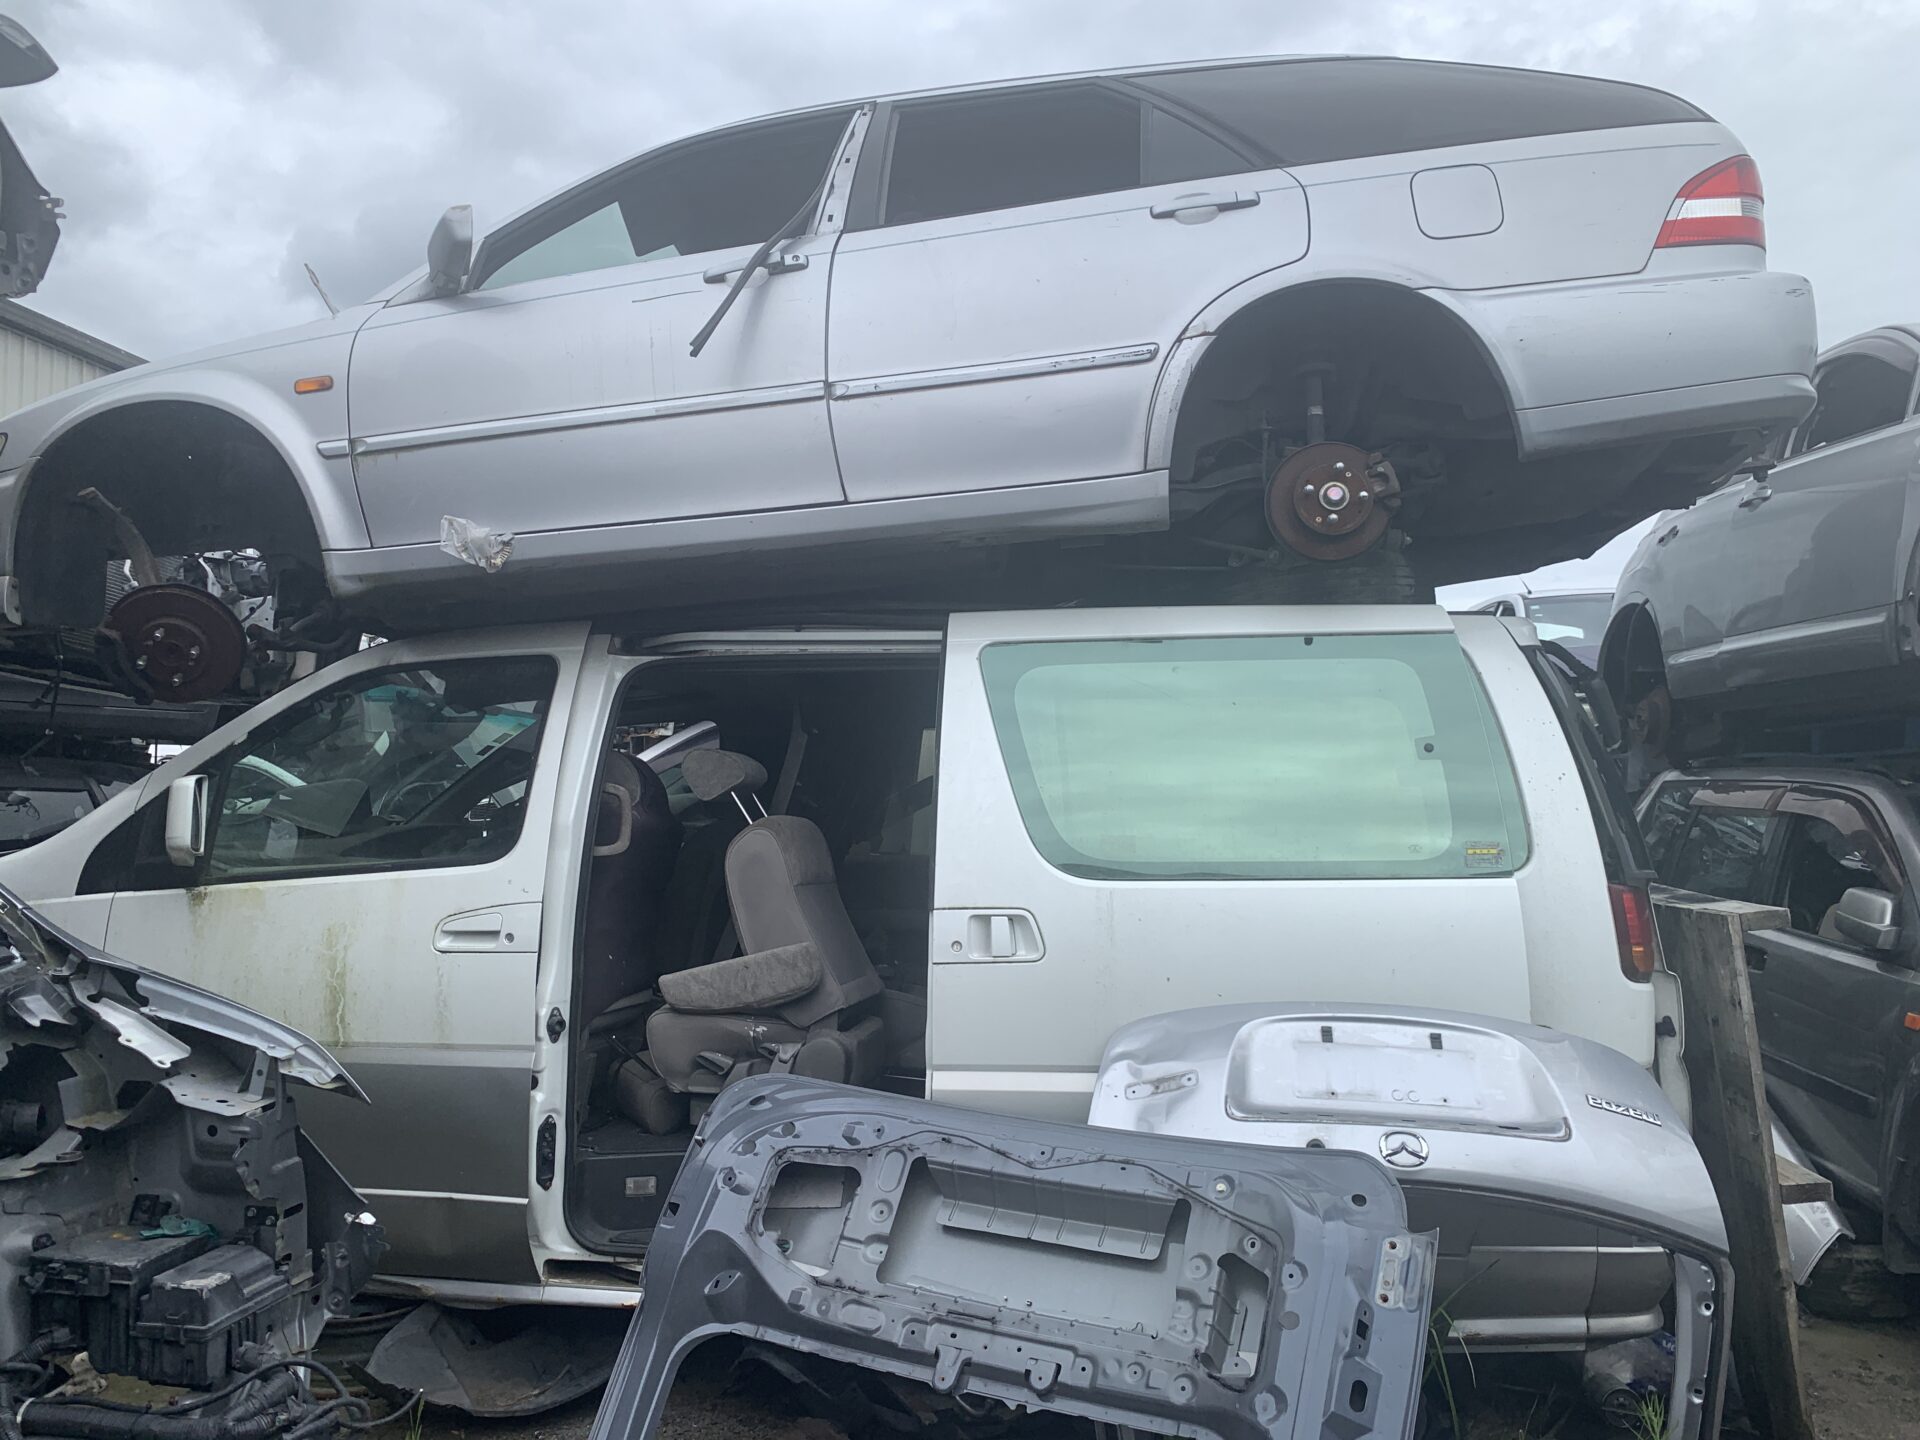 Cash For Cars Liverpool NSW: Unwanted Scrap Car Buyers